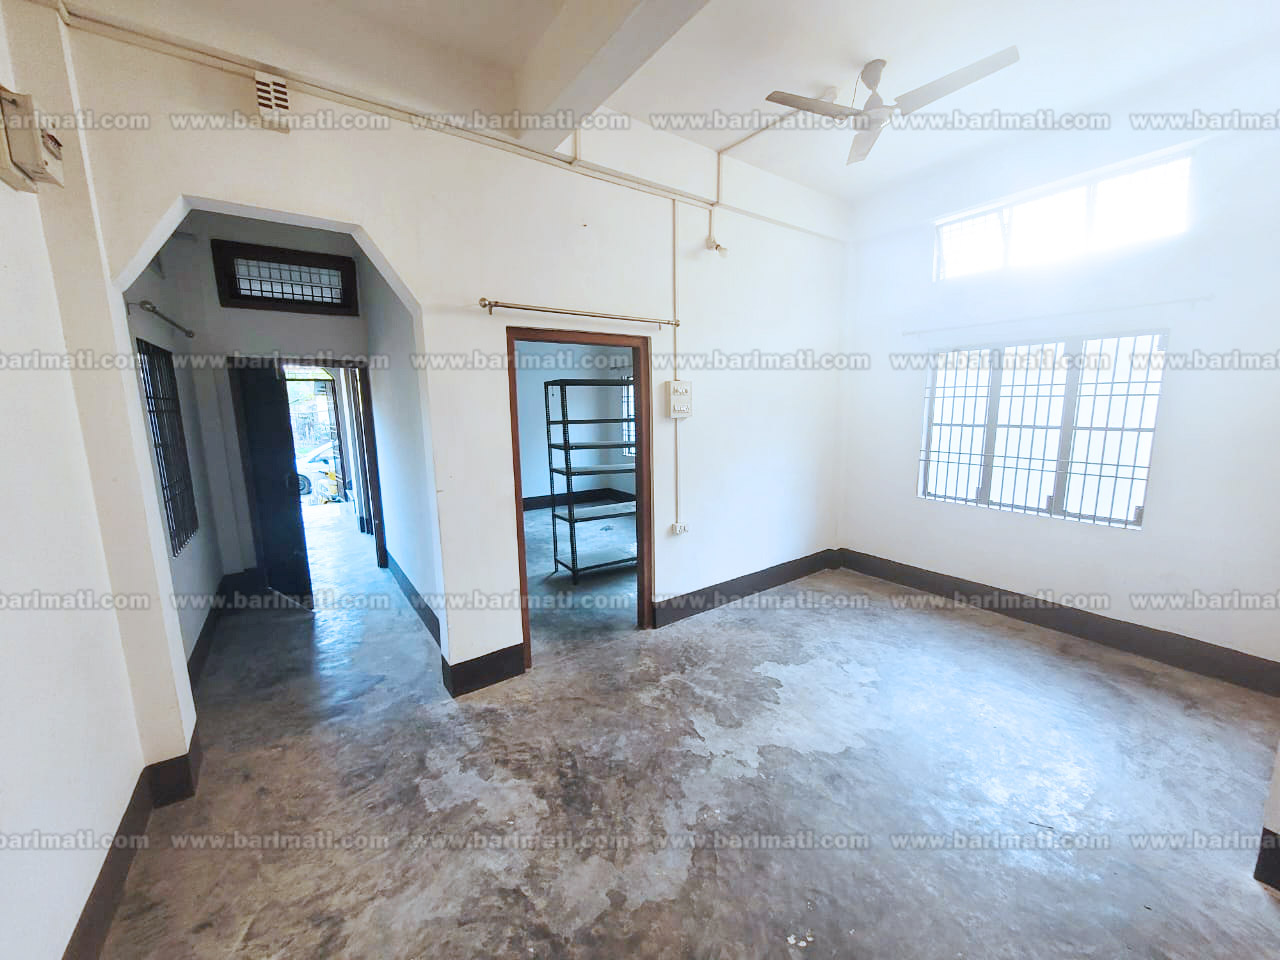 Spacious 2-bedroom house for rent in Amolapatty, Dibrugarh, offering an affordable living option under 9000